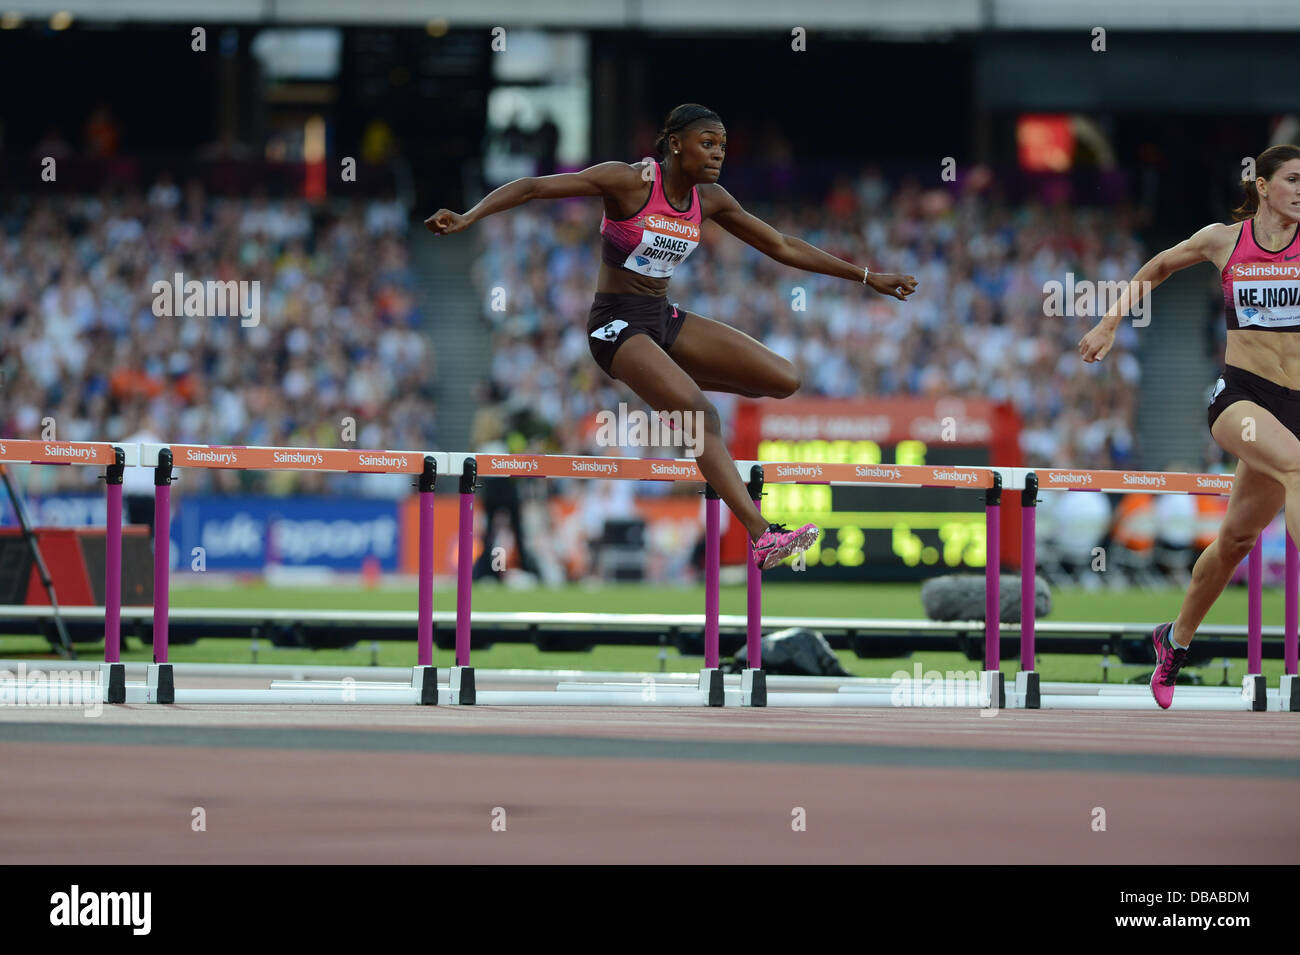 London, UK. 26th July, 2013. Perri Shakes-Drayton runs a personal best coming second in the women's 400m hurdles at the London Anniversary Games Diamond League Athletics meeting, July 26th 2013 Credit:  Martin Bateman/Alamy Live News Stock Photo